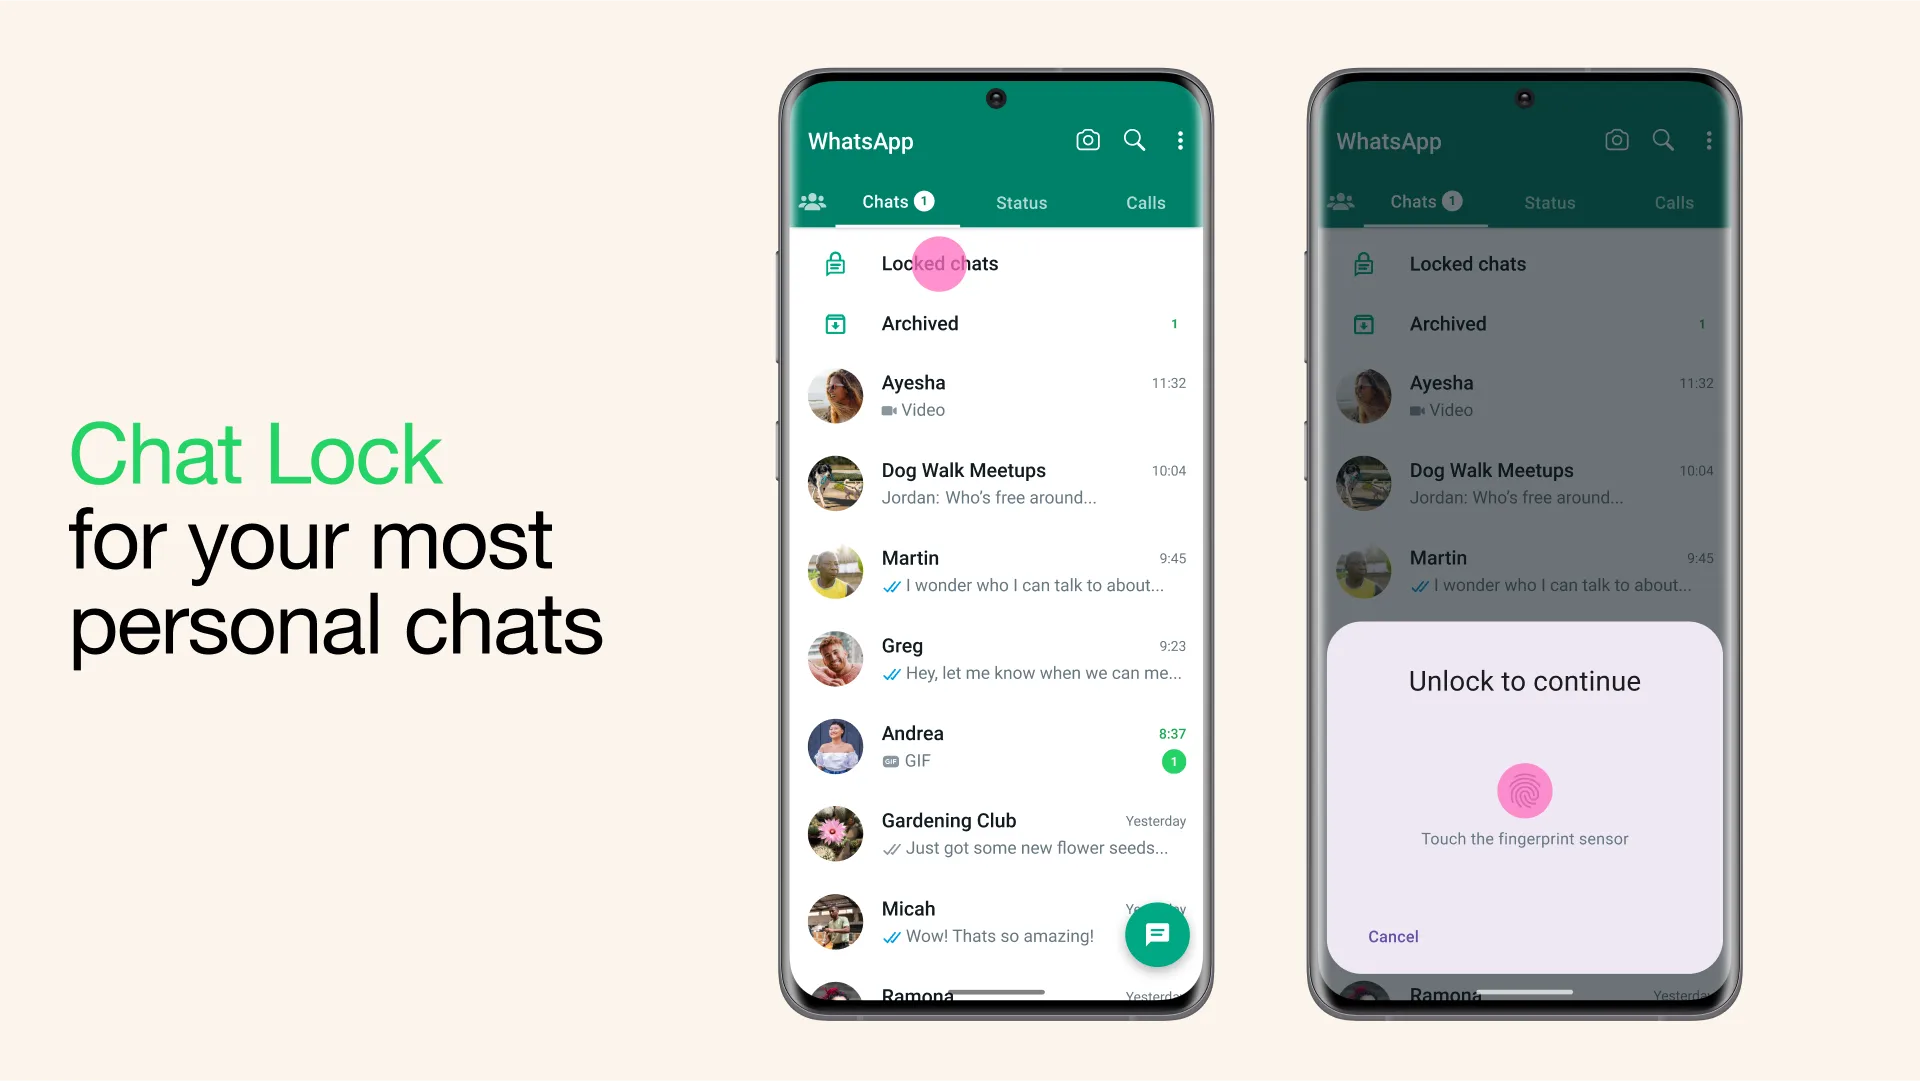 WhatsApp’s new feature “Chat Lock” : Enhances privacy for your chats